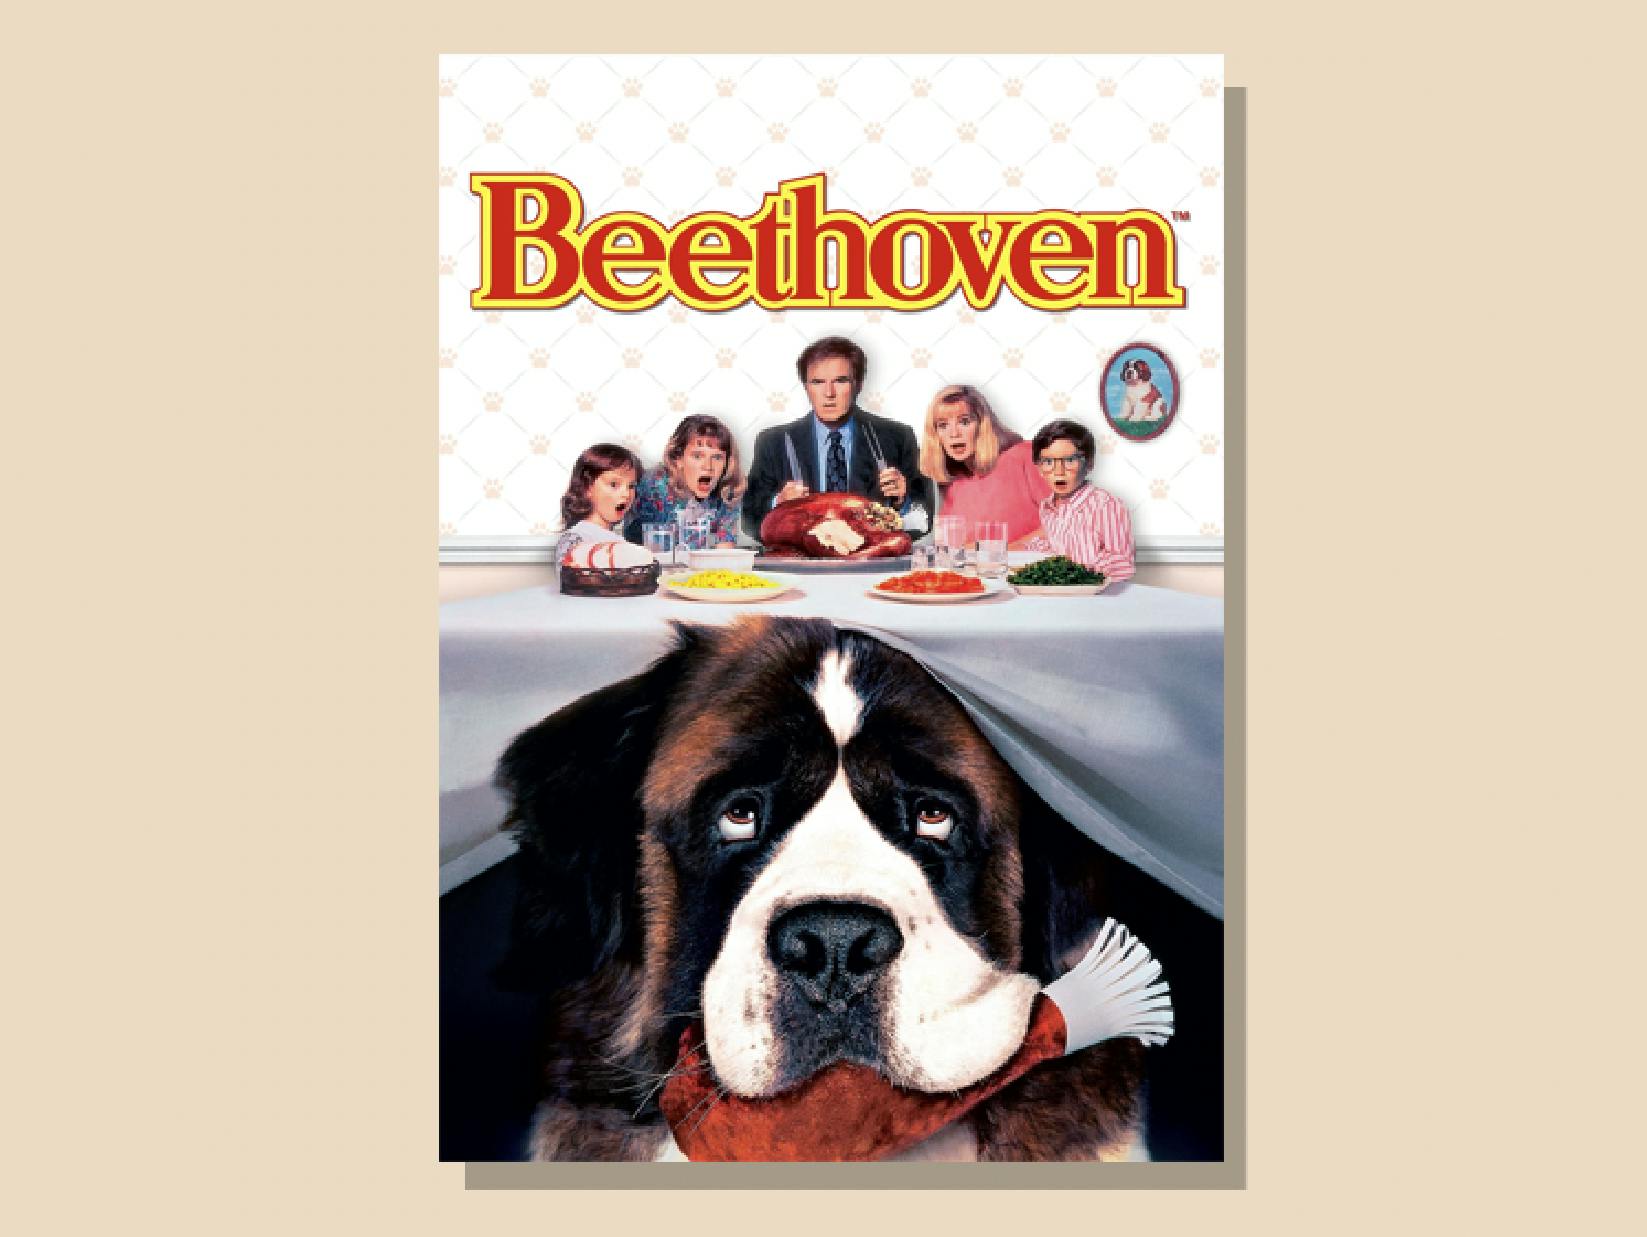 Beethoven, one of the best kids thanksgiving movies